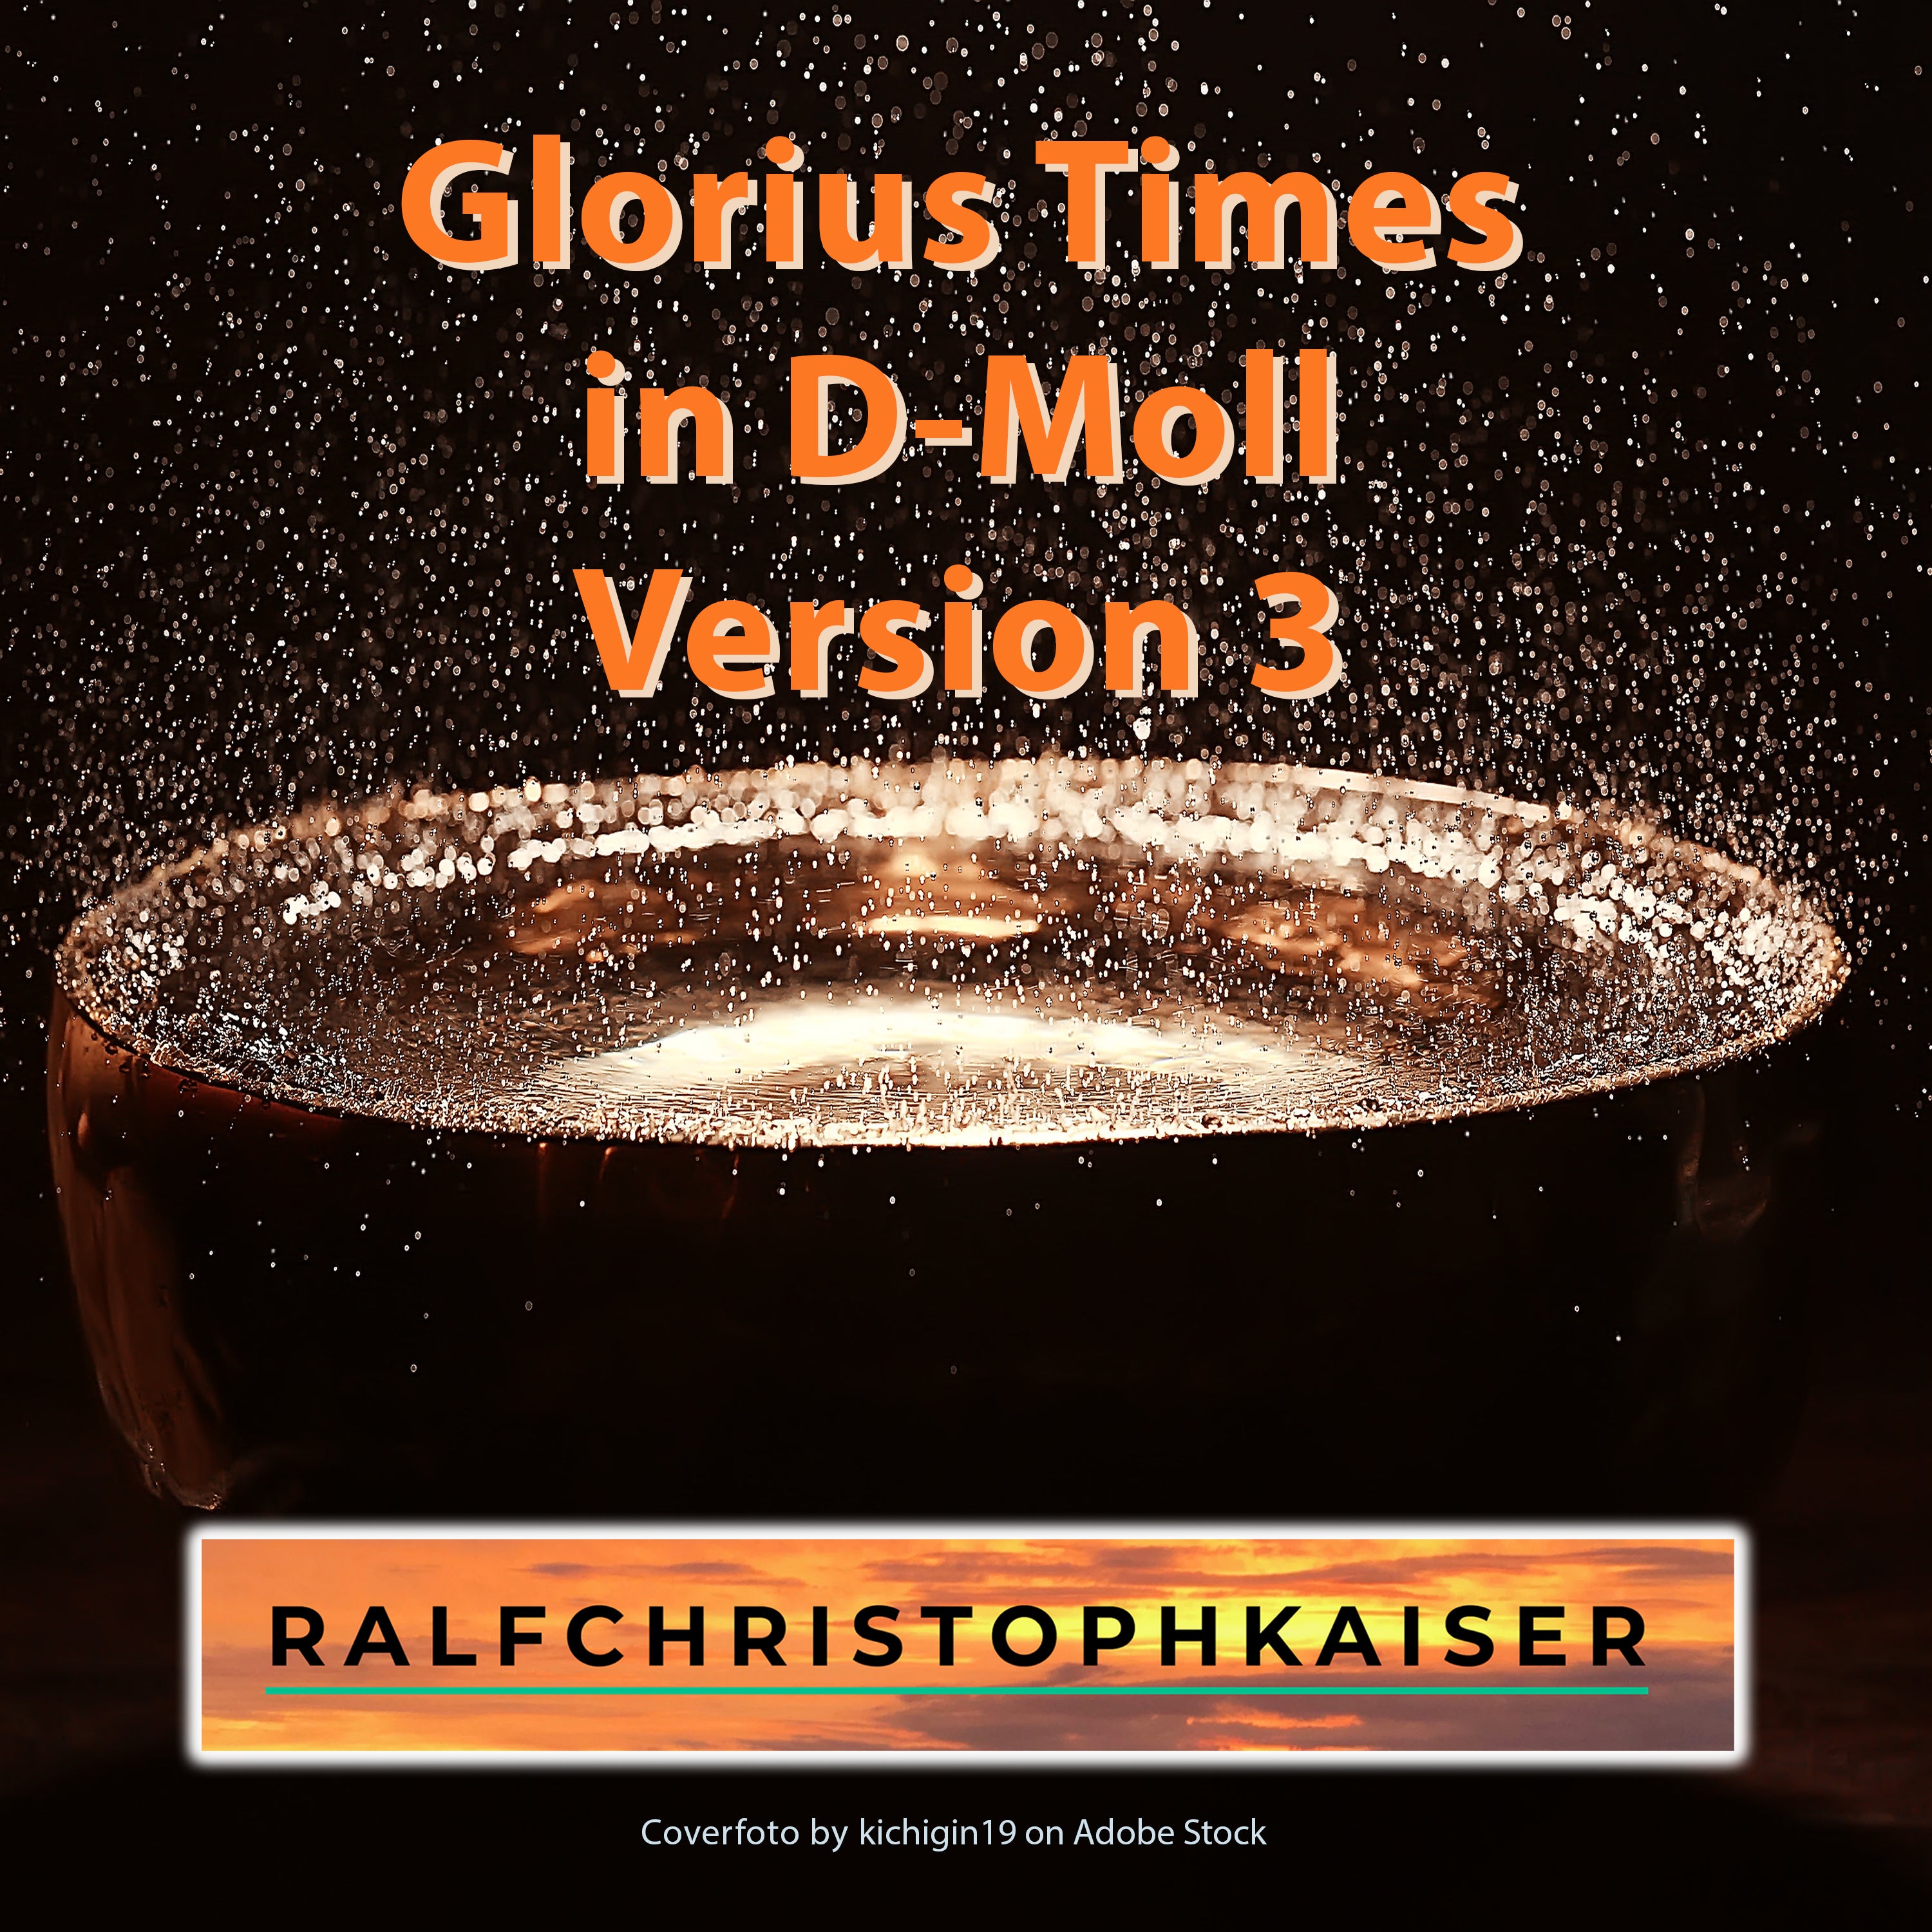 "Glorius Times" in D-Minor version 3 by Ralf Christoph Kaiser full score full orchestra leadsheet and parts and high resolution wav file and everything your heart desires - ralfchristophkaiser.com Musik und Noten